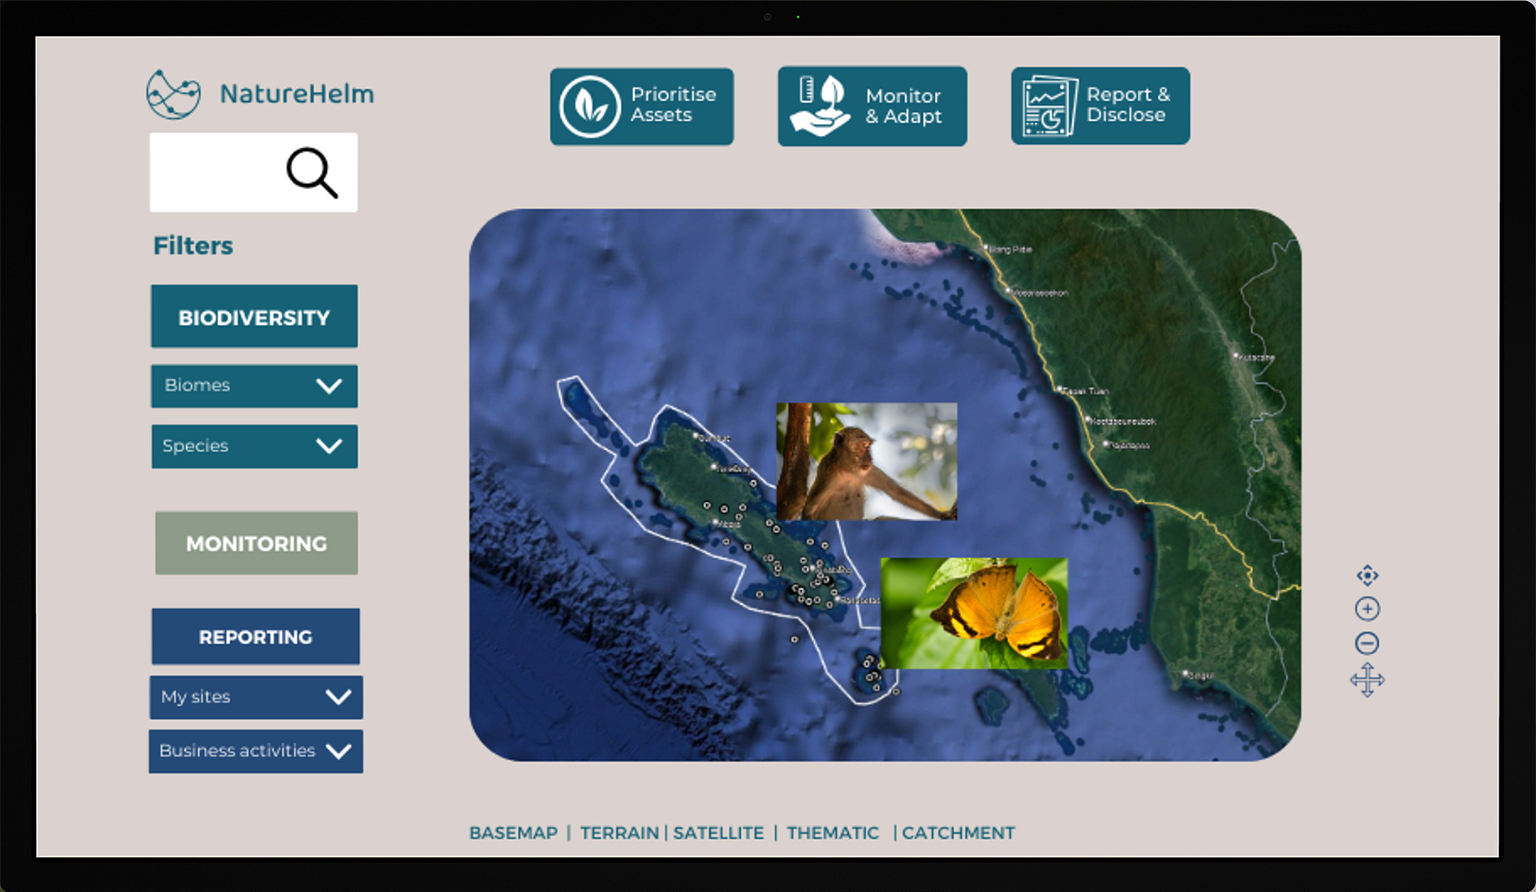 The interface for the new platform NatureTech which allows companies and landowners to track important biodiversity markers.